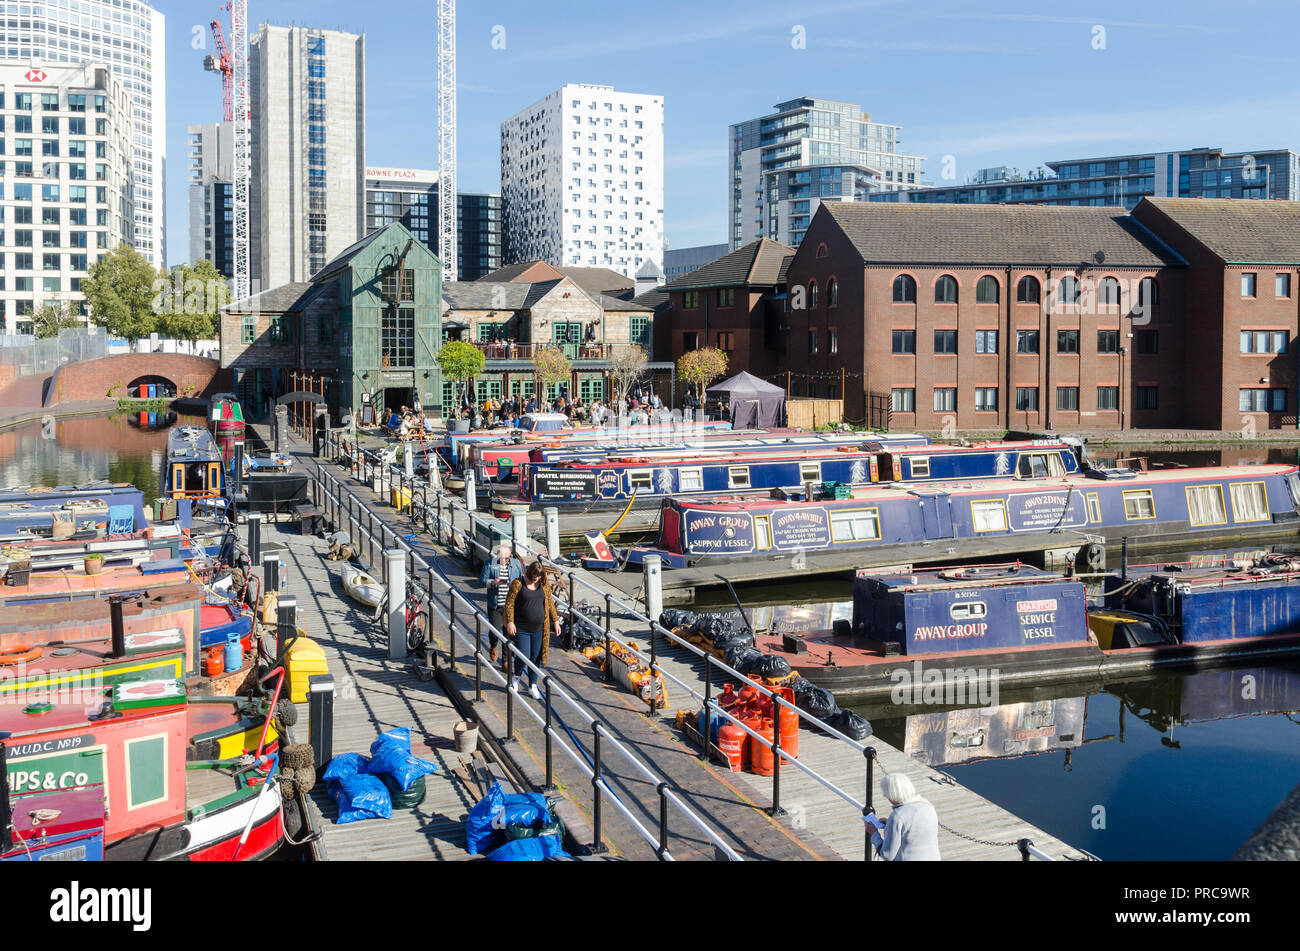 Colourful narrow boats moored in gas street basin at the heart of Birmingham's canal network with the Canal House pub in the background Stock Photo